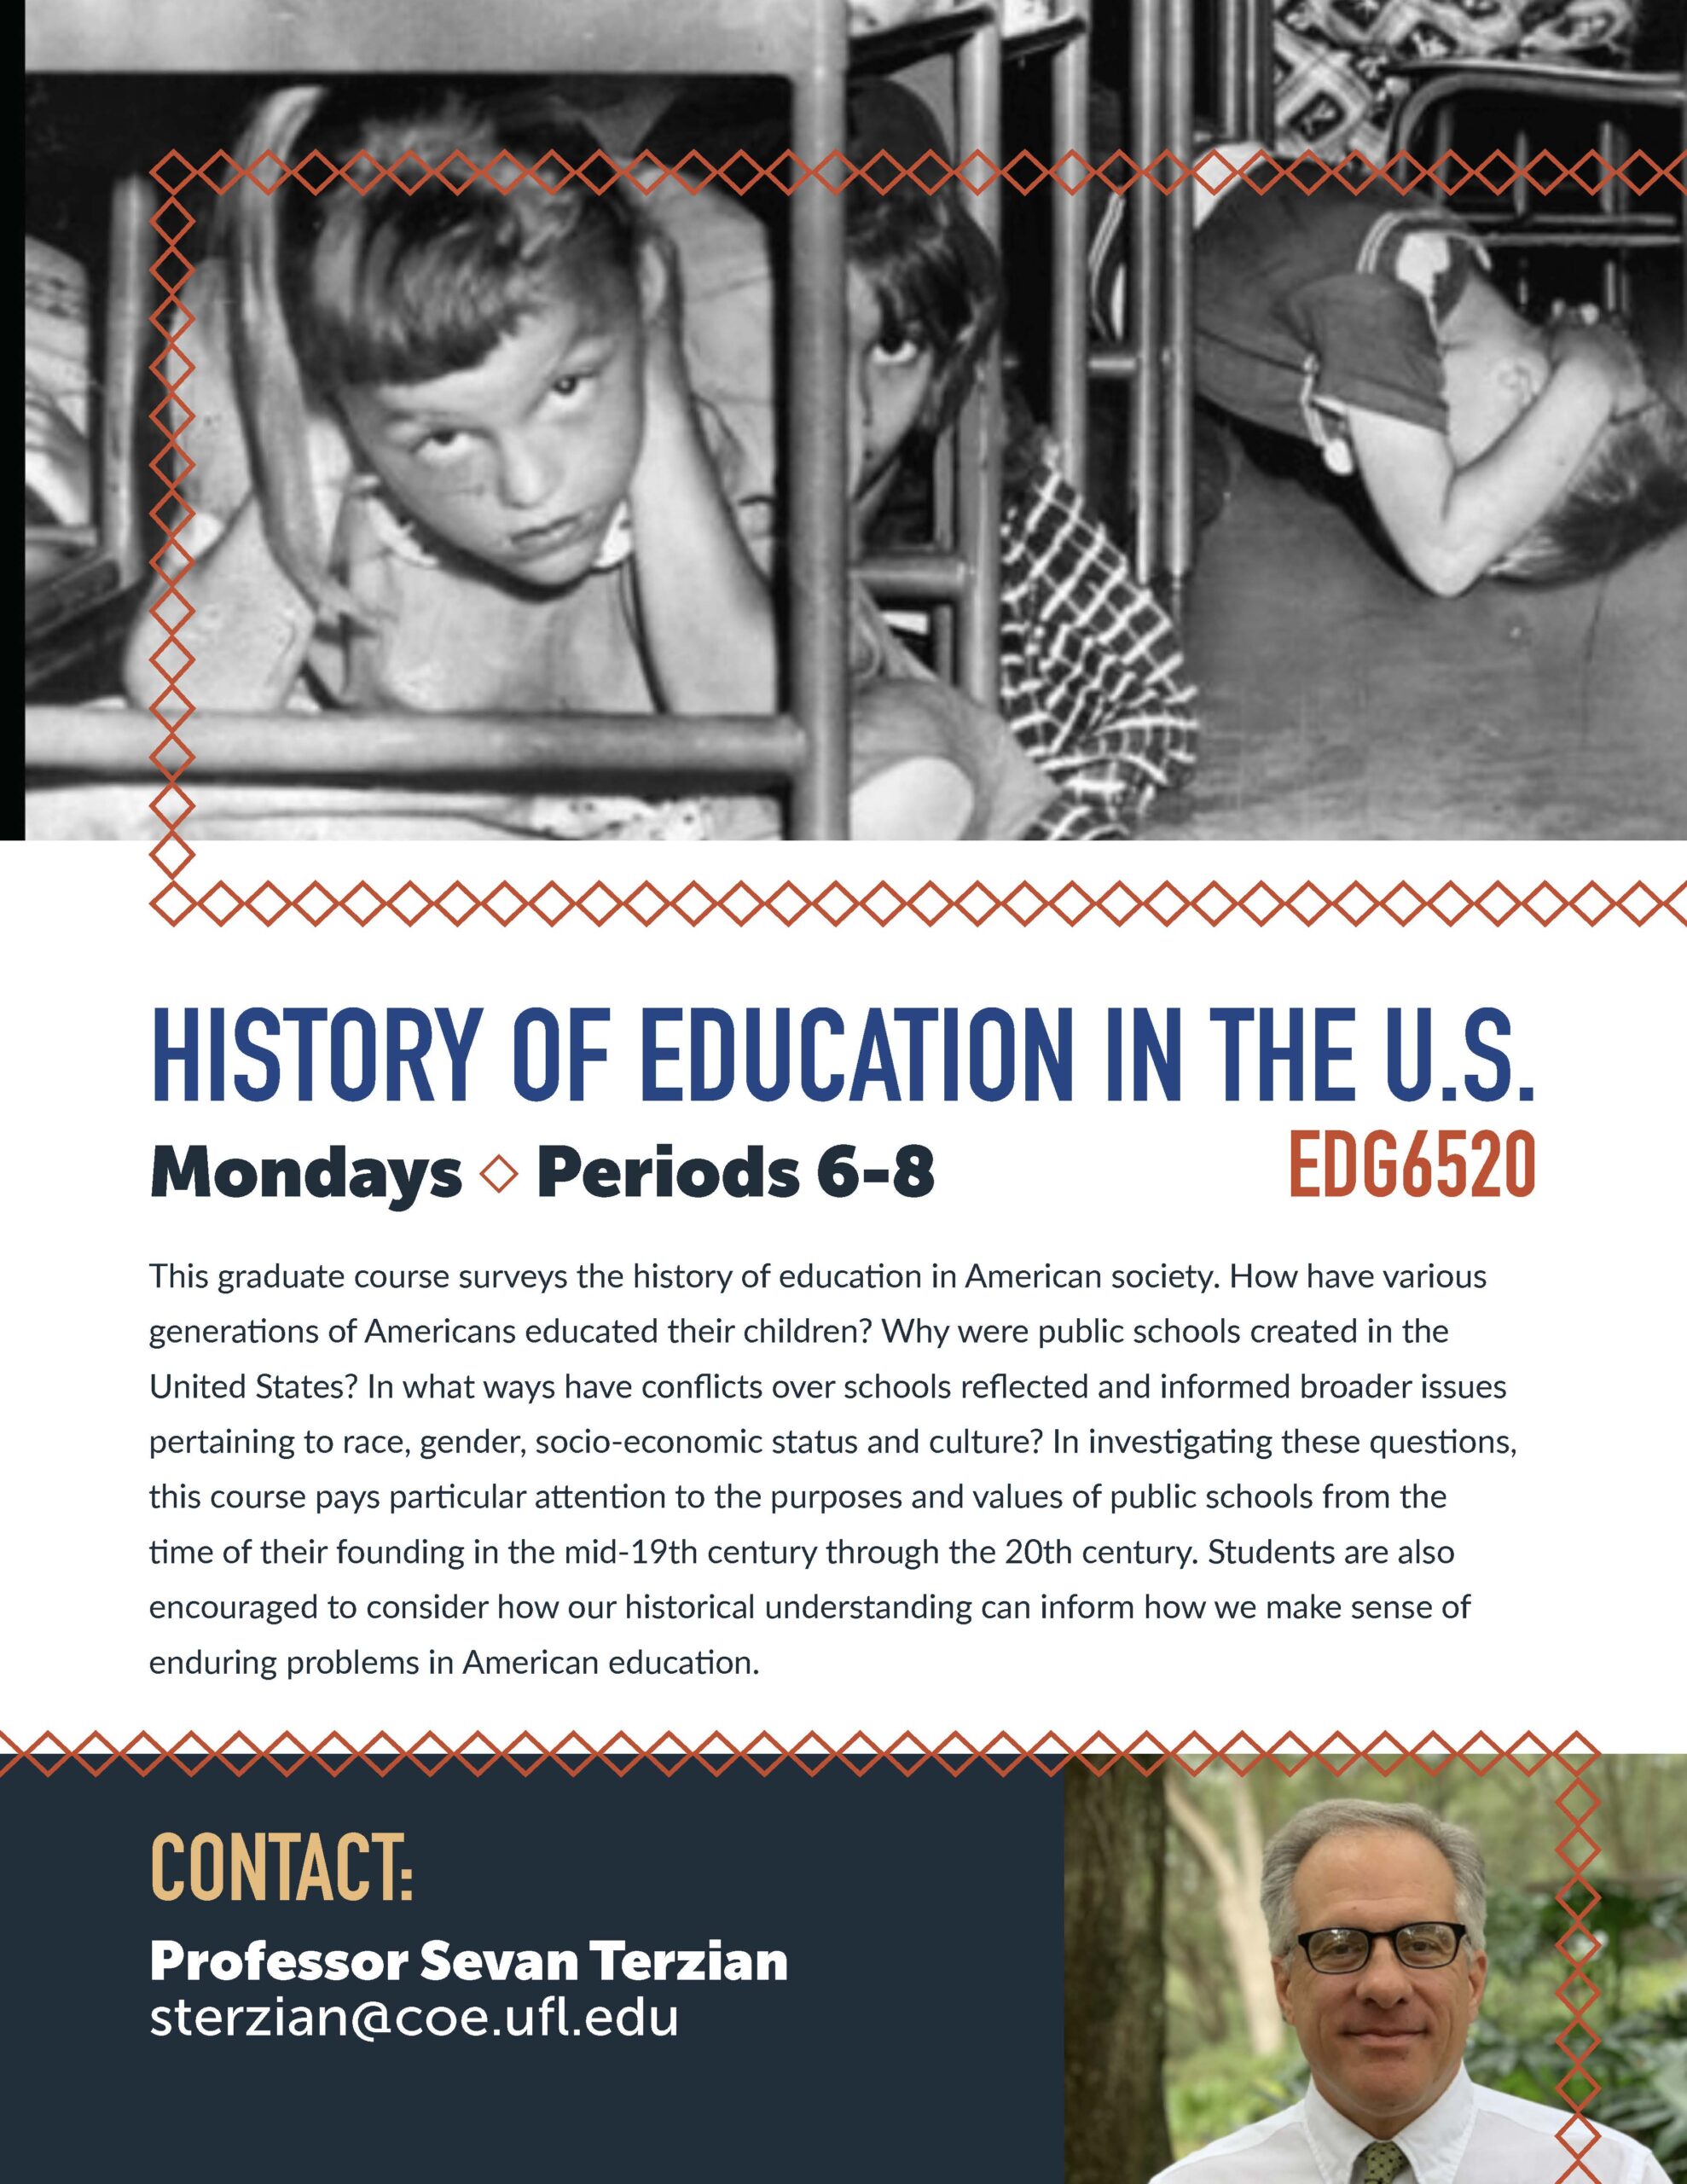 History of Education in the U.S. - EDG6520